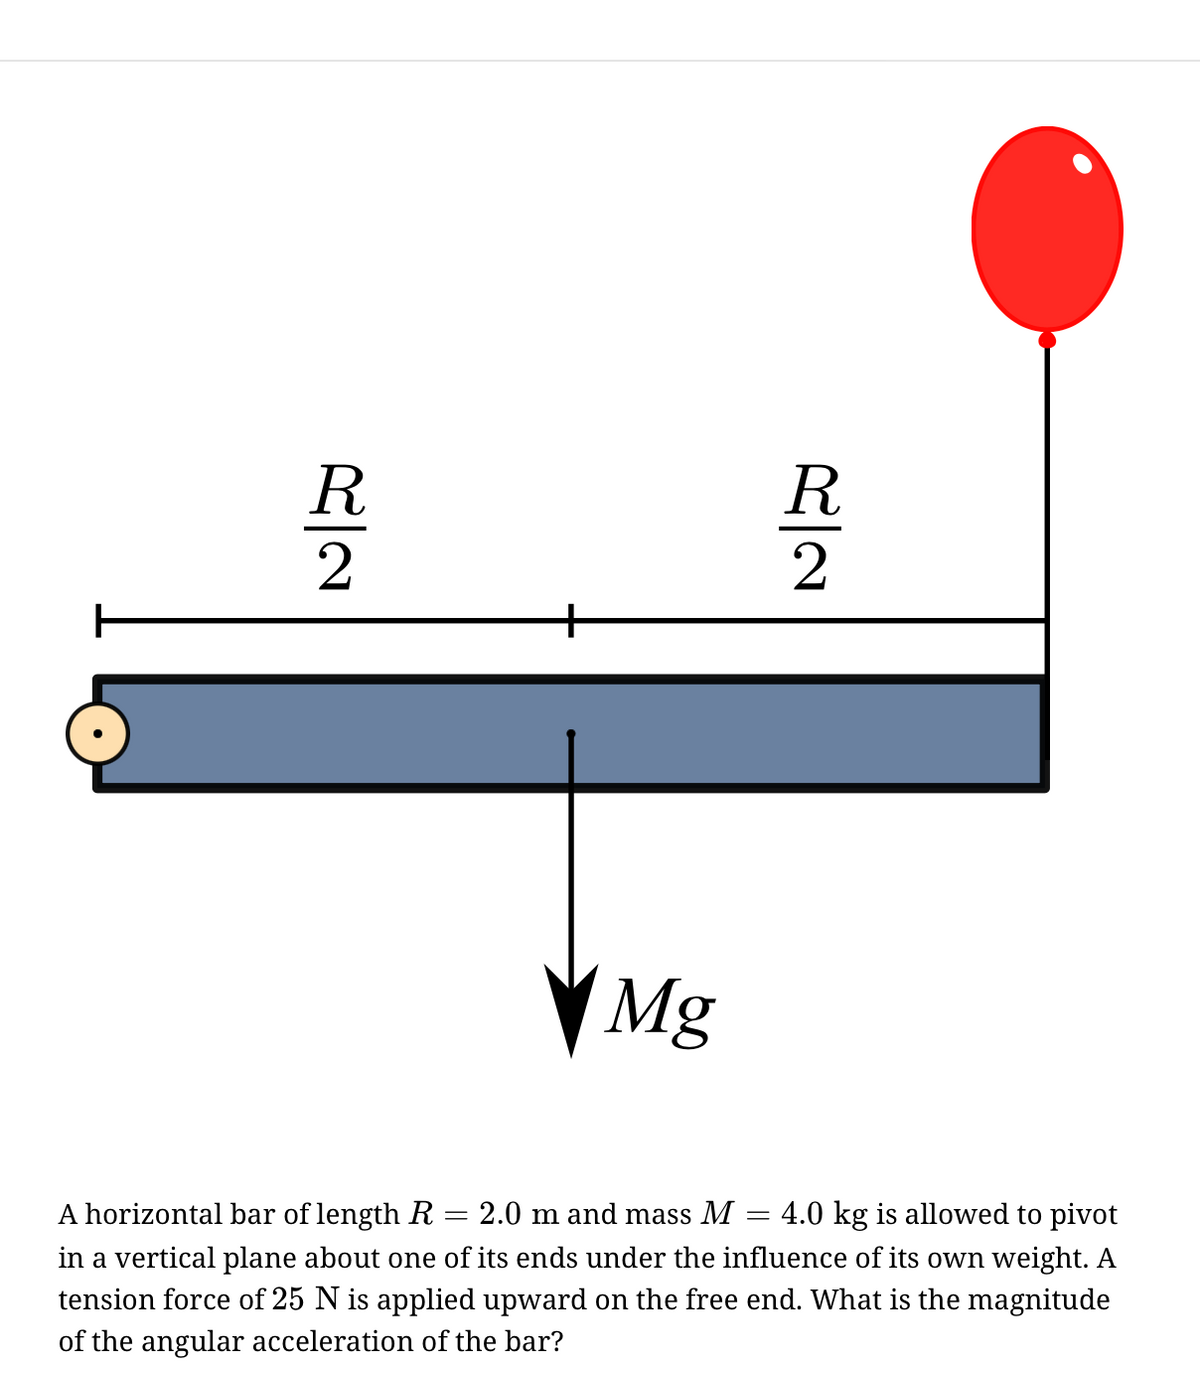 2
VMg
A horizontal bar of length R = 2.0 m and mass M = 4.0 kg is allowed to pivot
in a vertical plane about one of its ends under the influence of its own weight. A
tension force of 25 N is applied upward on the free end. What is the magnitude
of the angular acceleration of the bar?
